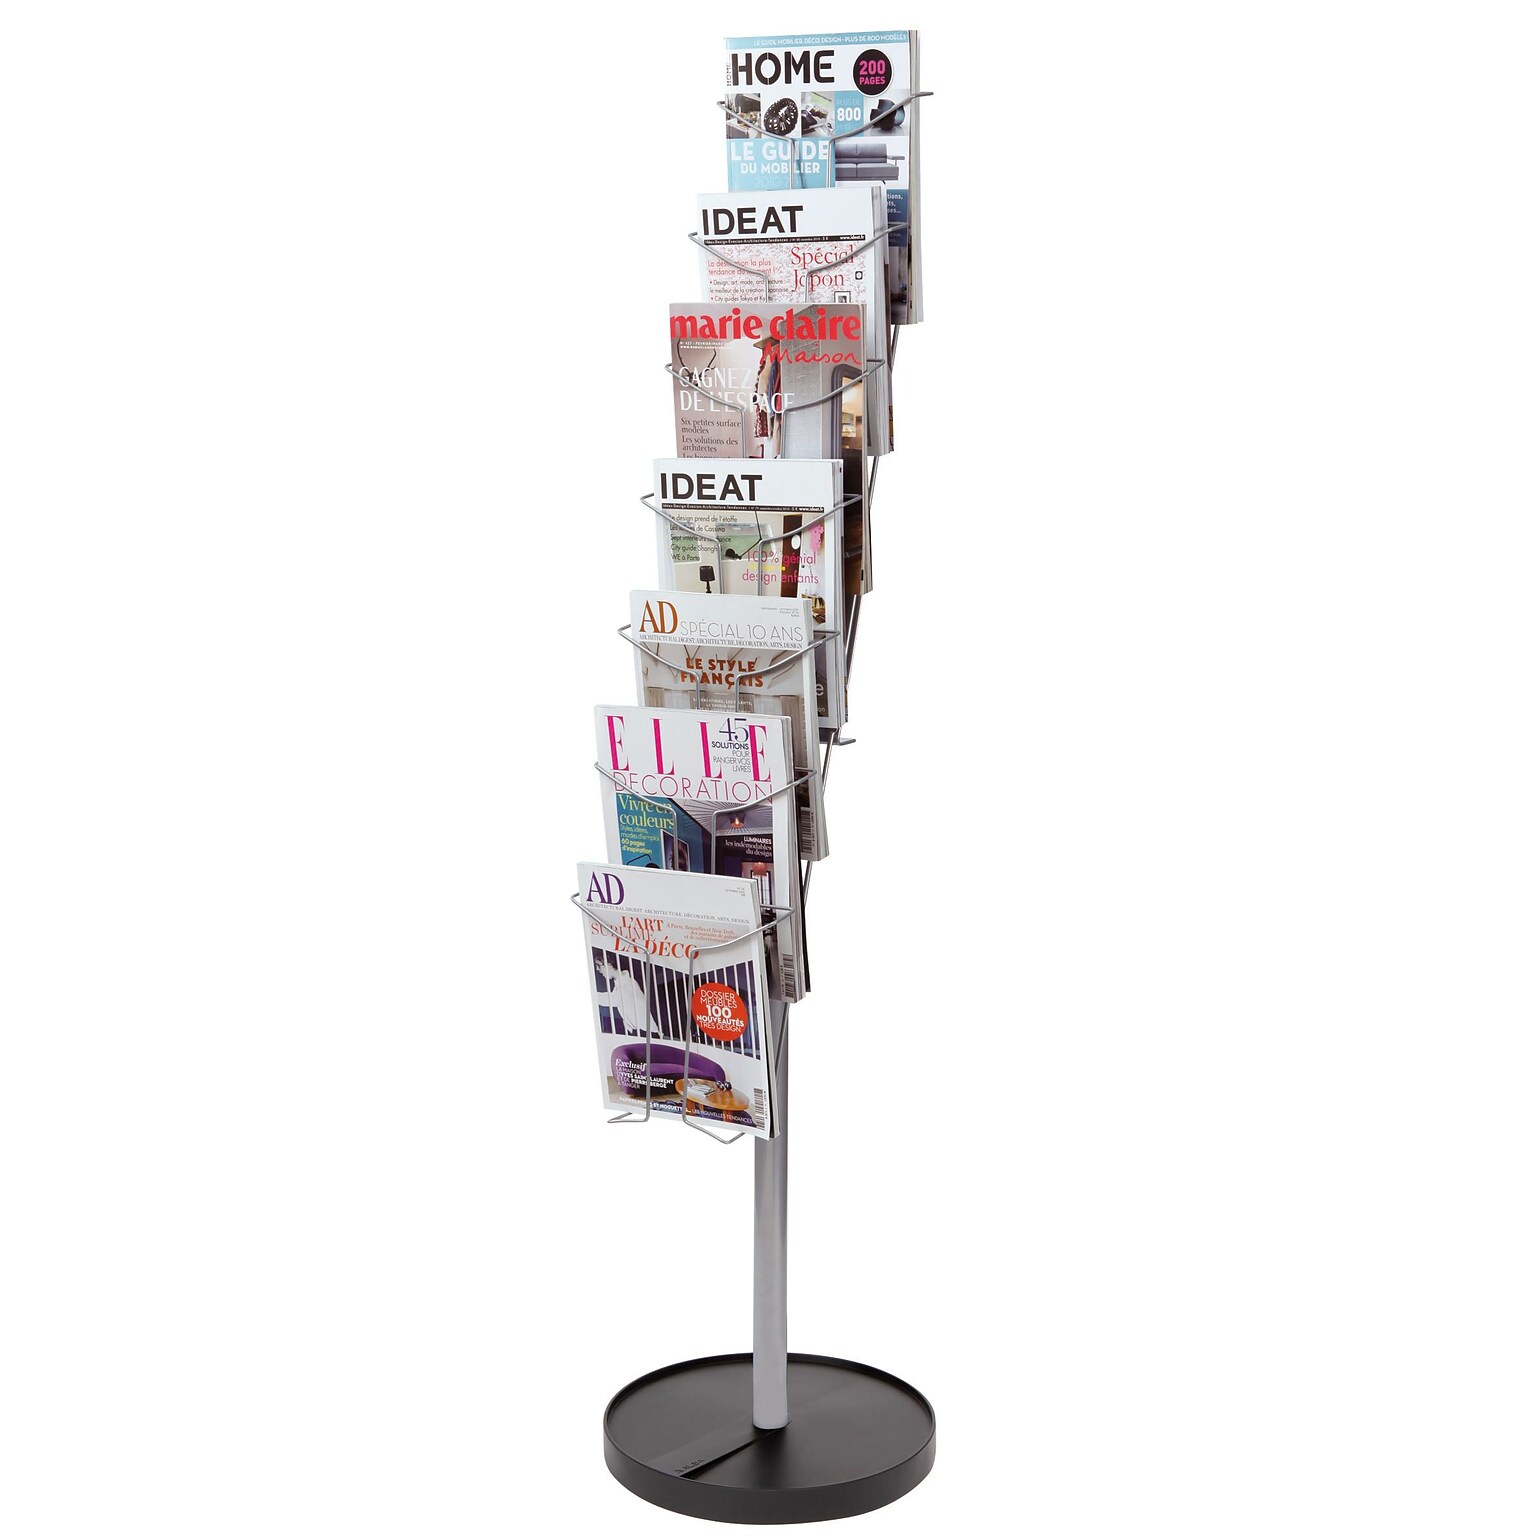 Alba Literature Holder, 9.4 x 12.6, Gray and Clear Metal (DDFIL7S)